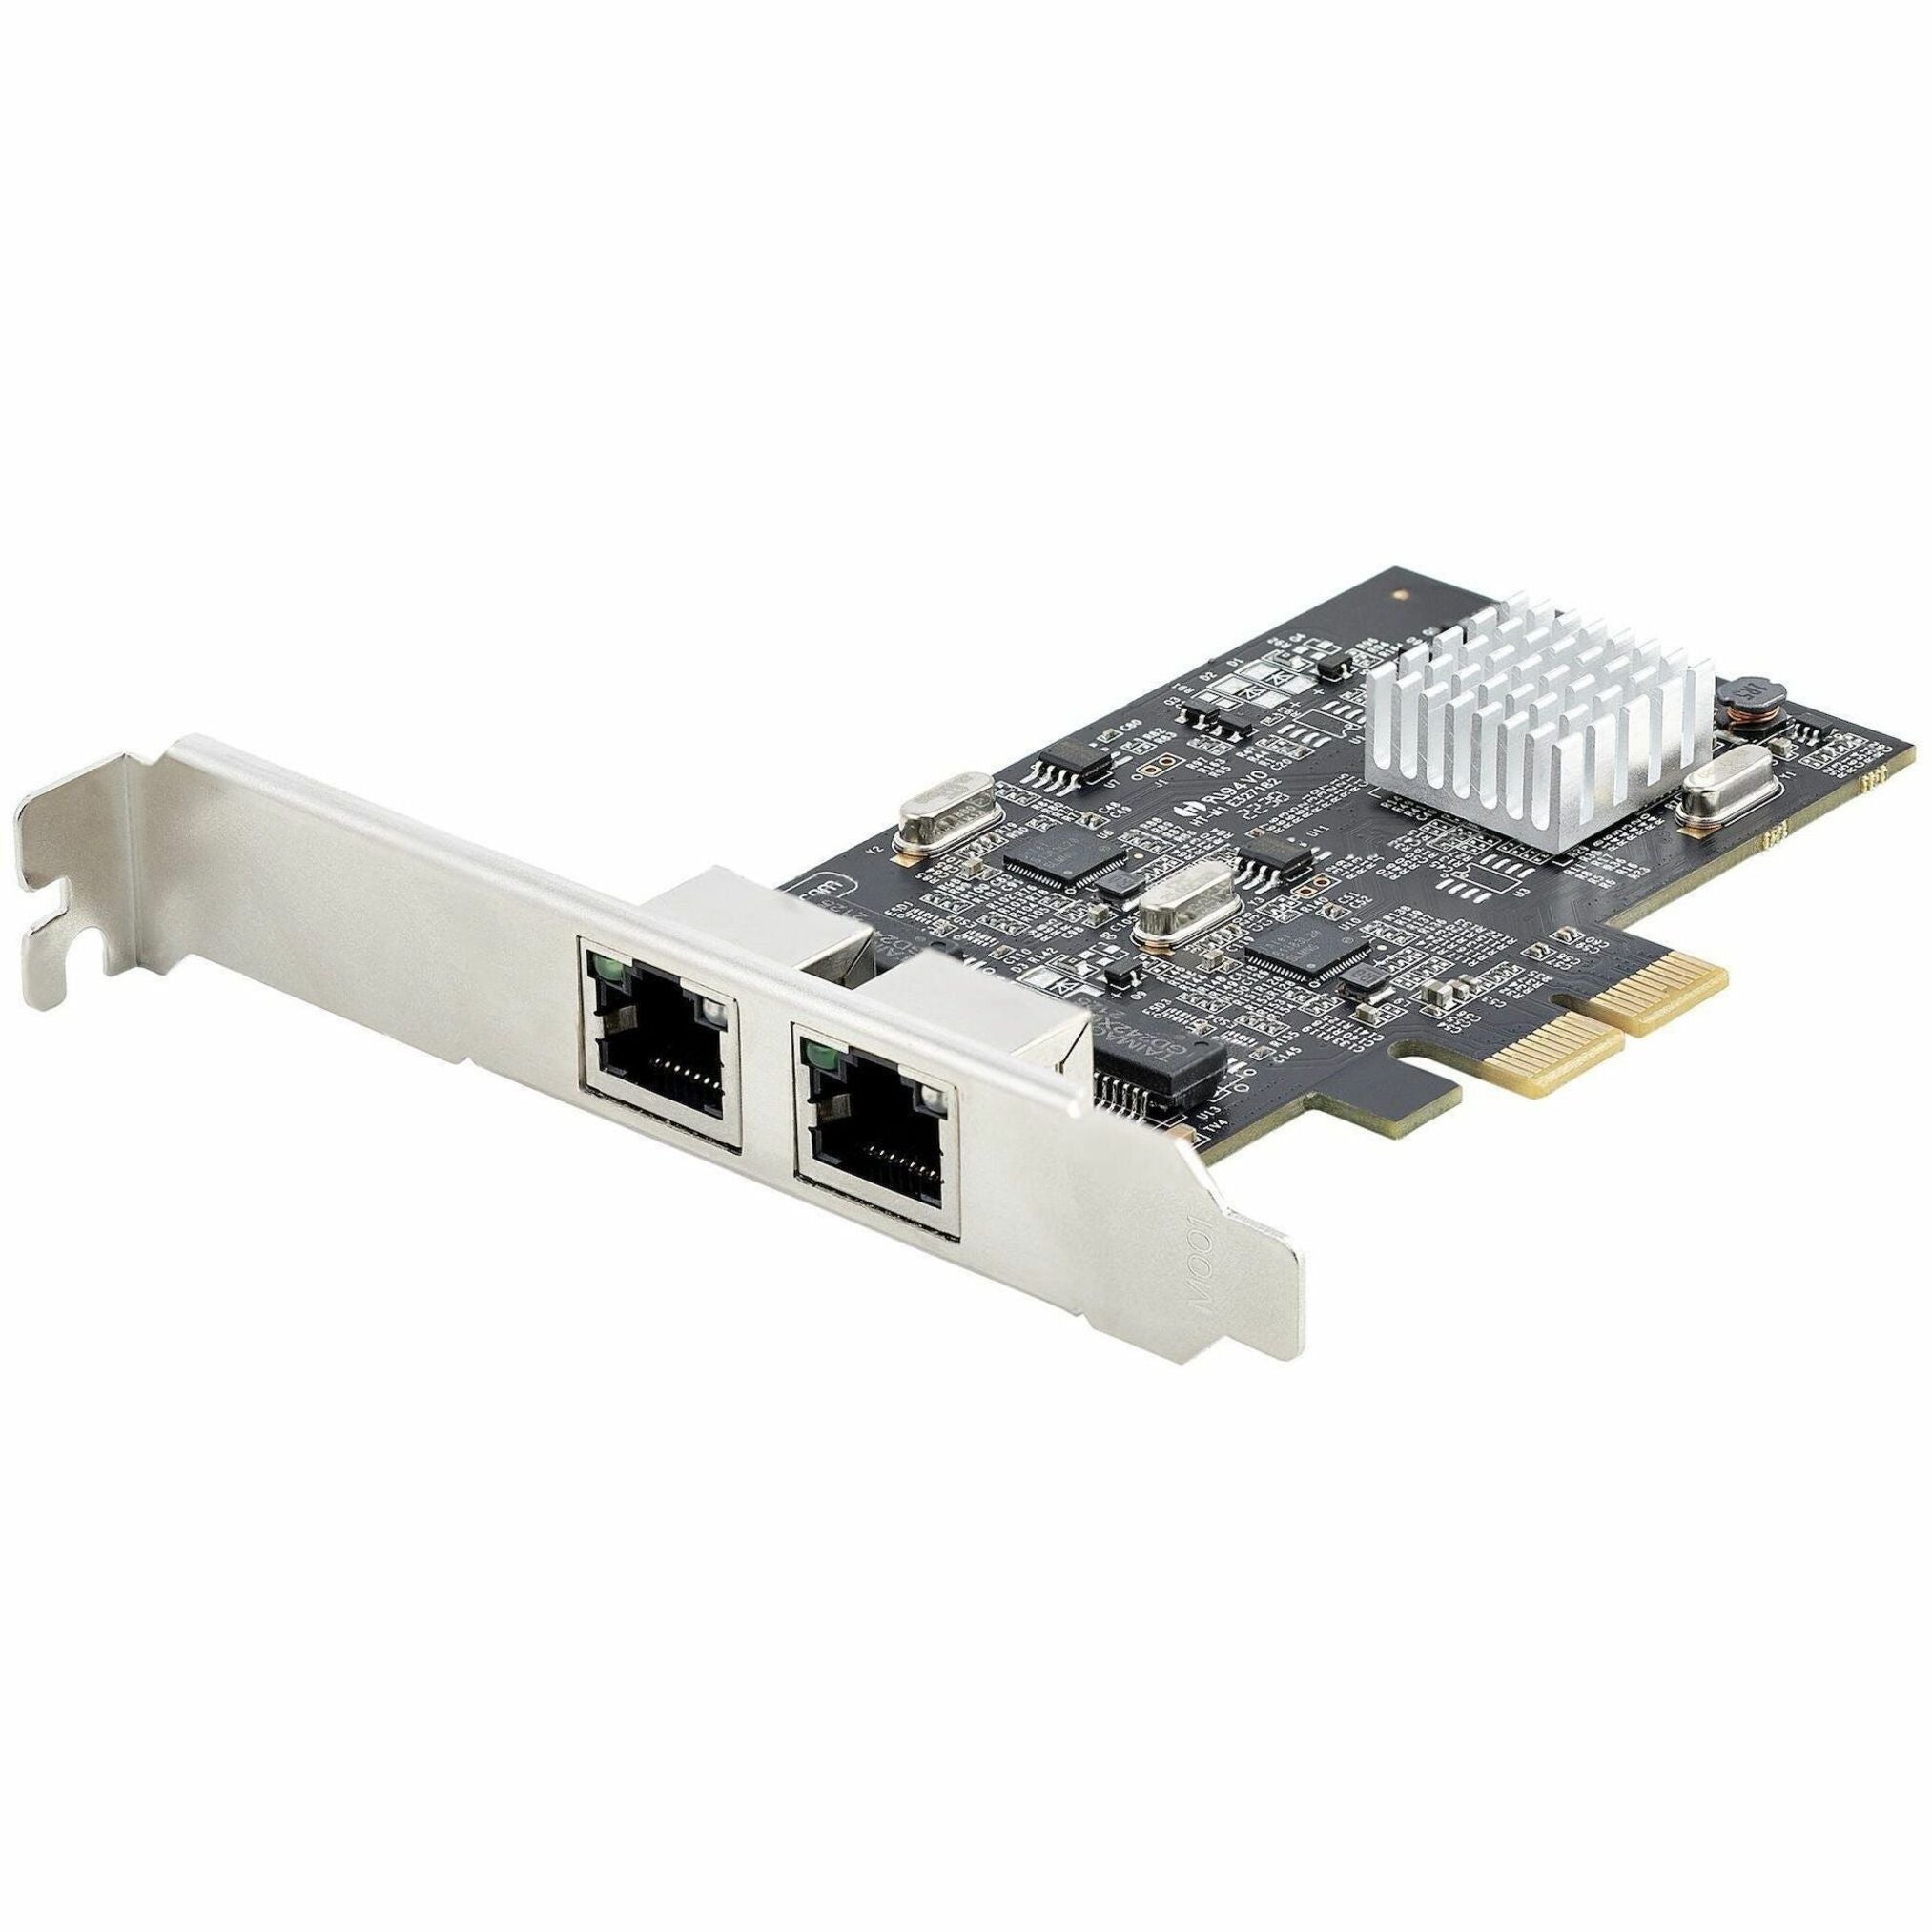 StarTech.com PR22GI-NETWORK-CARD 2-Port 2.5GBase-T Ethernet Network Adapter Card - PCIe 2.0 x2 High-Speed Network Connectivity